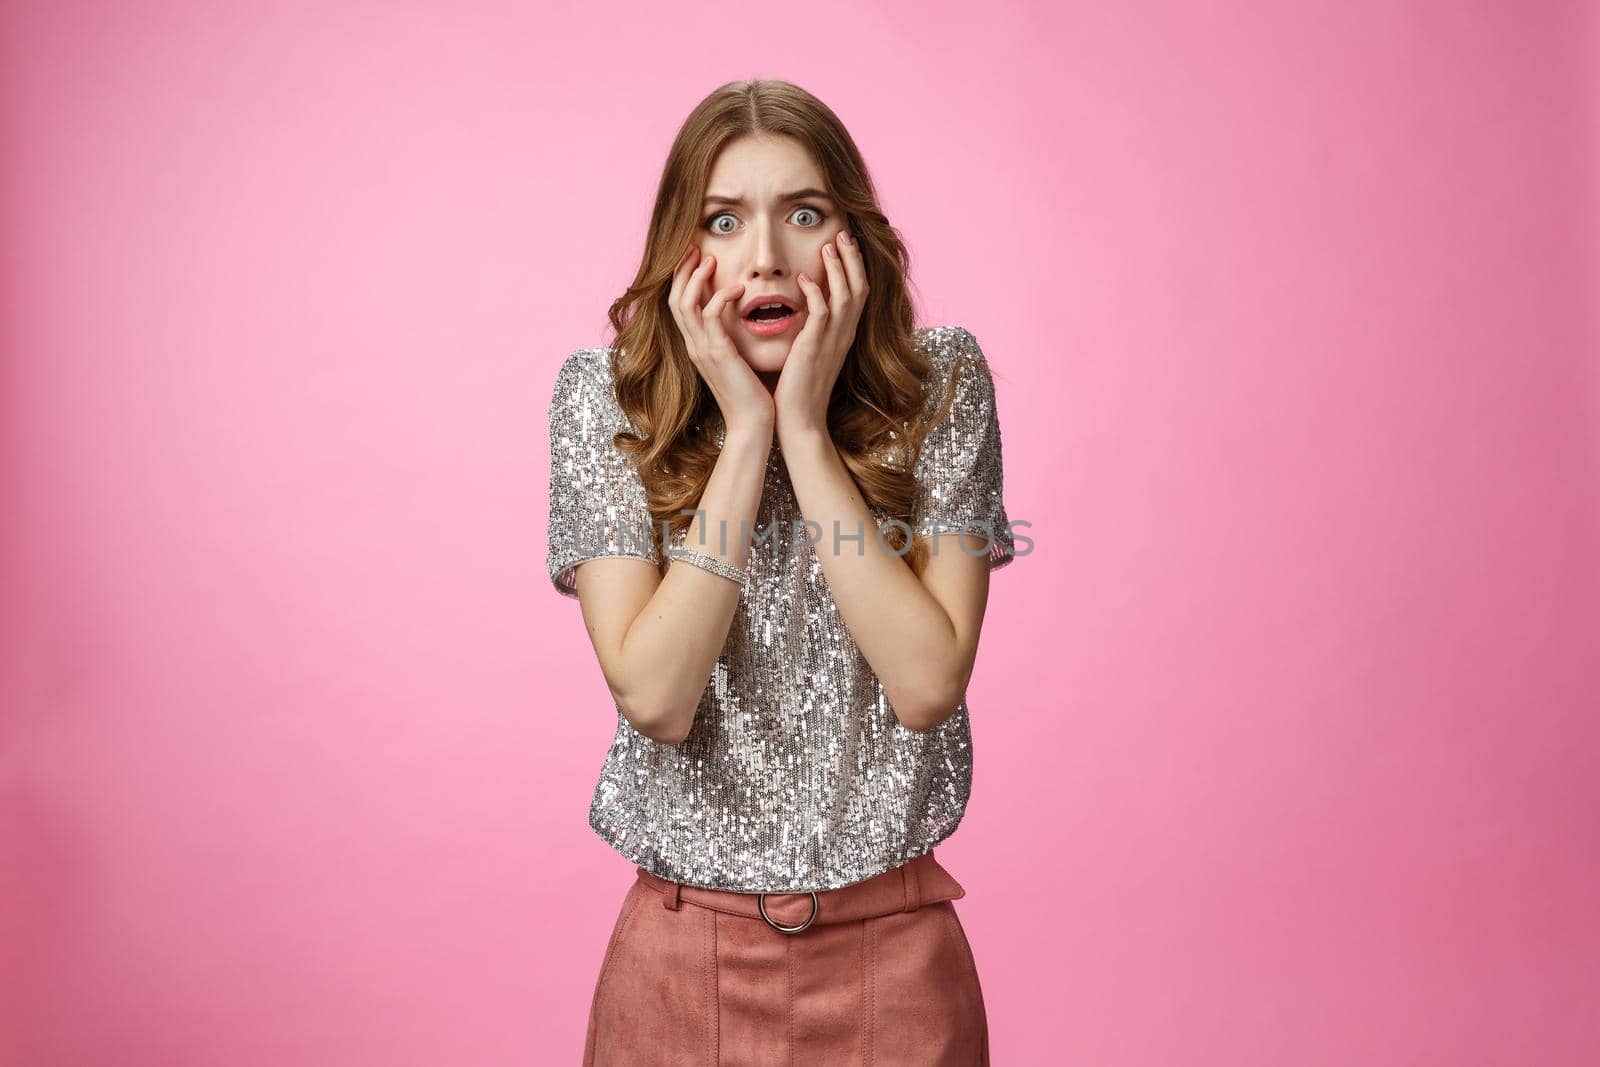 Shocked concerned attractive female student gasping gosh what happened widen eyes shocked drop jaw panicking freak-out touching face worried, standing anxious pink background. Copy space